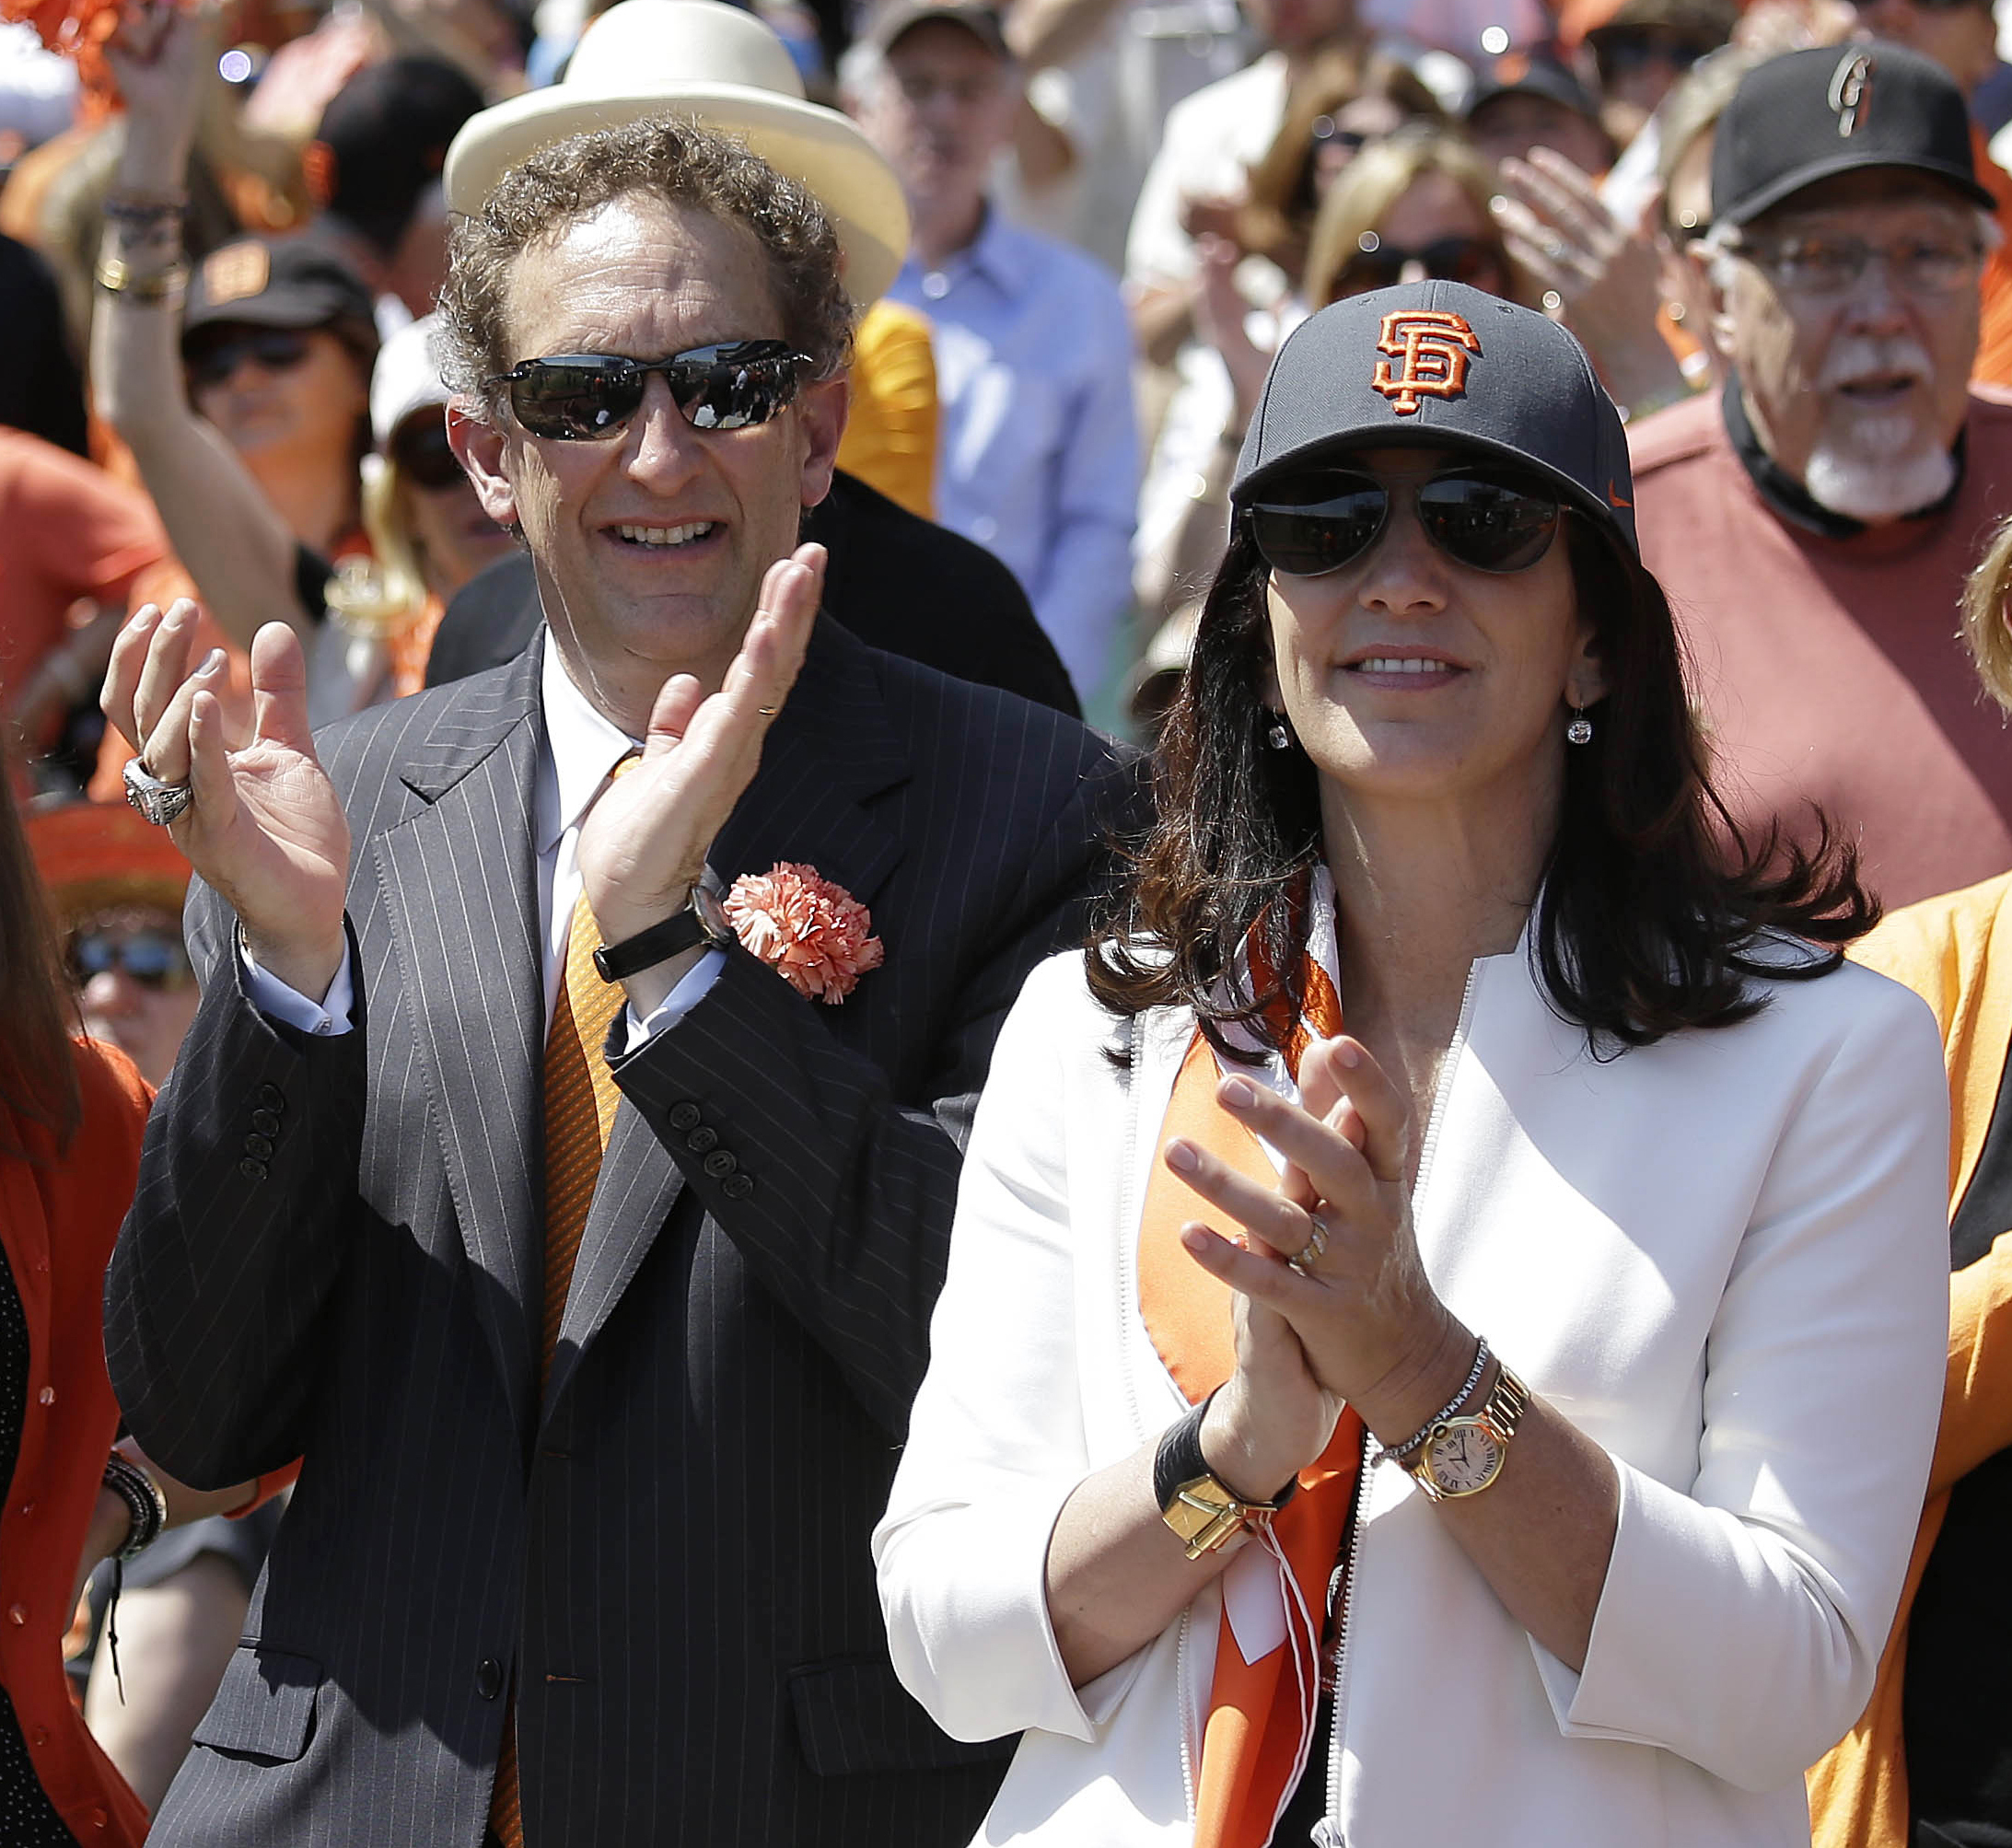 PHOTO: In this April 8, 2014, file photo, San Francisco Giants president and CEO Larry Baer, and his wife Pam, applaud before an opening day baseball game against the Arizona Diamondbacks, in San Francisco.